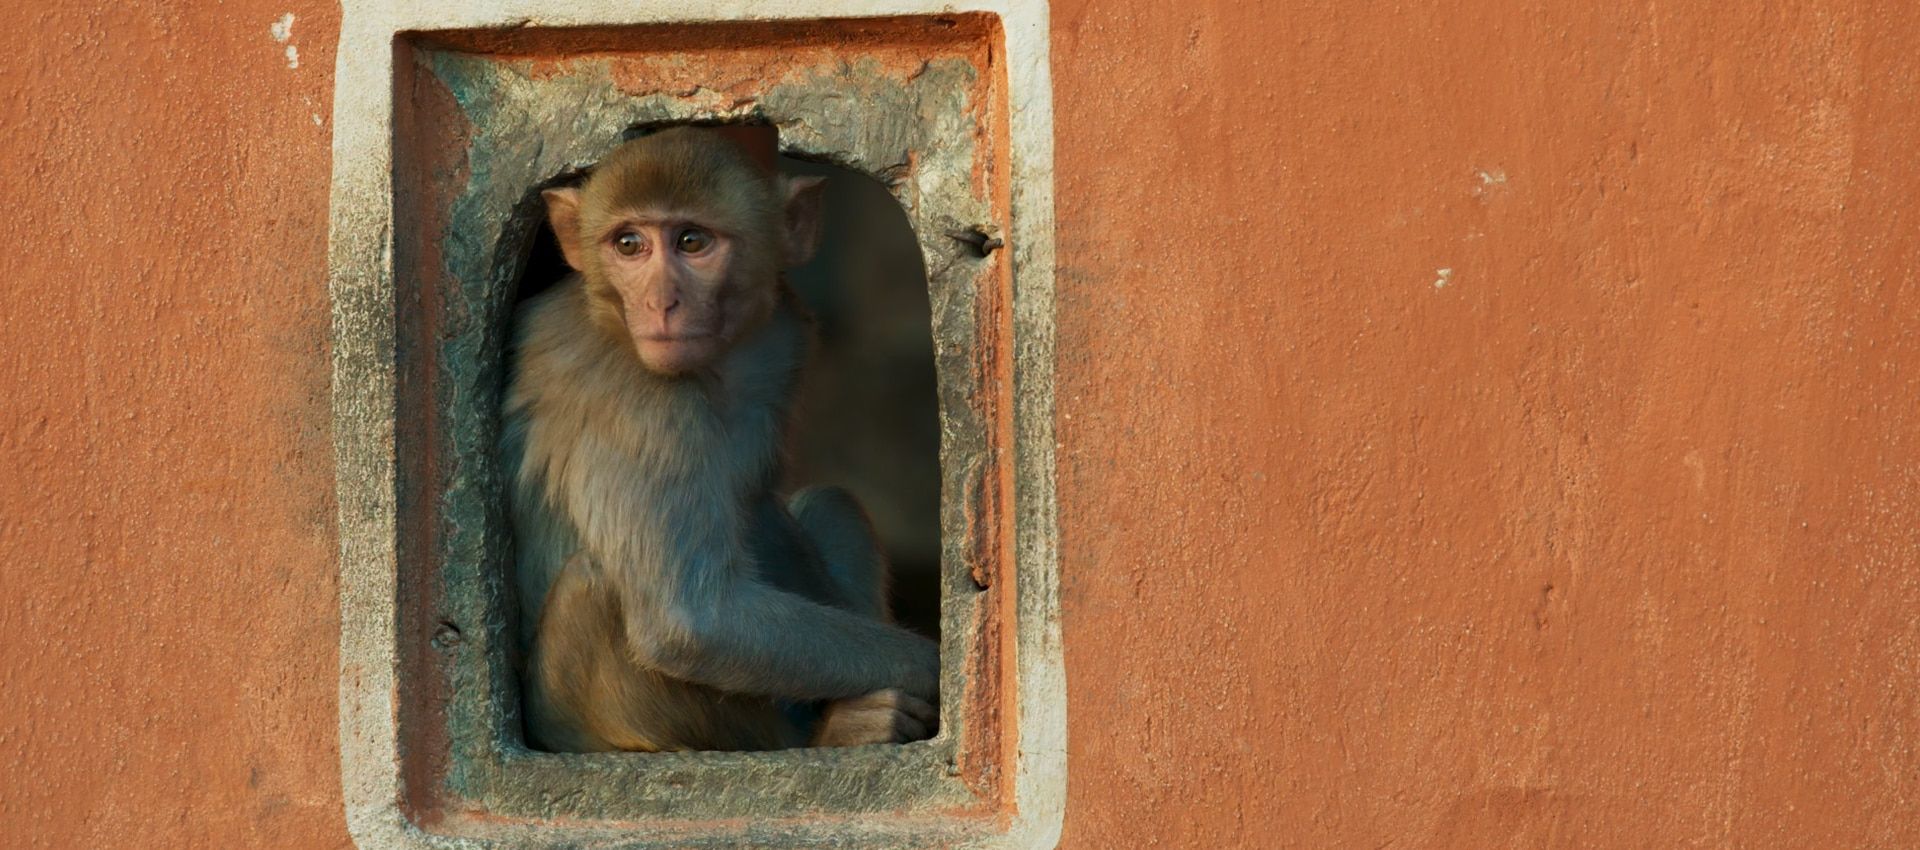 Macaque standing in a window frame